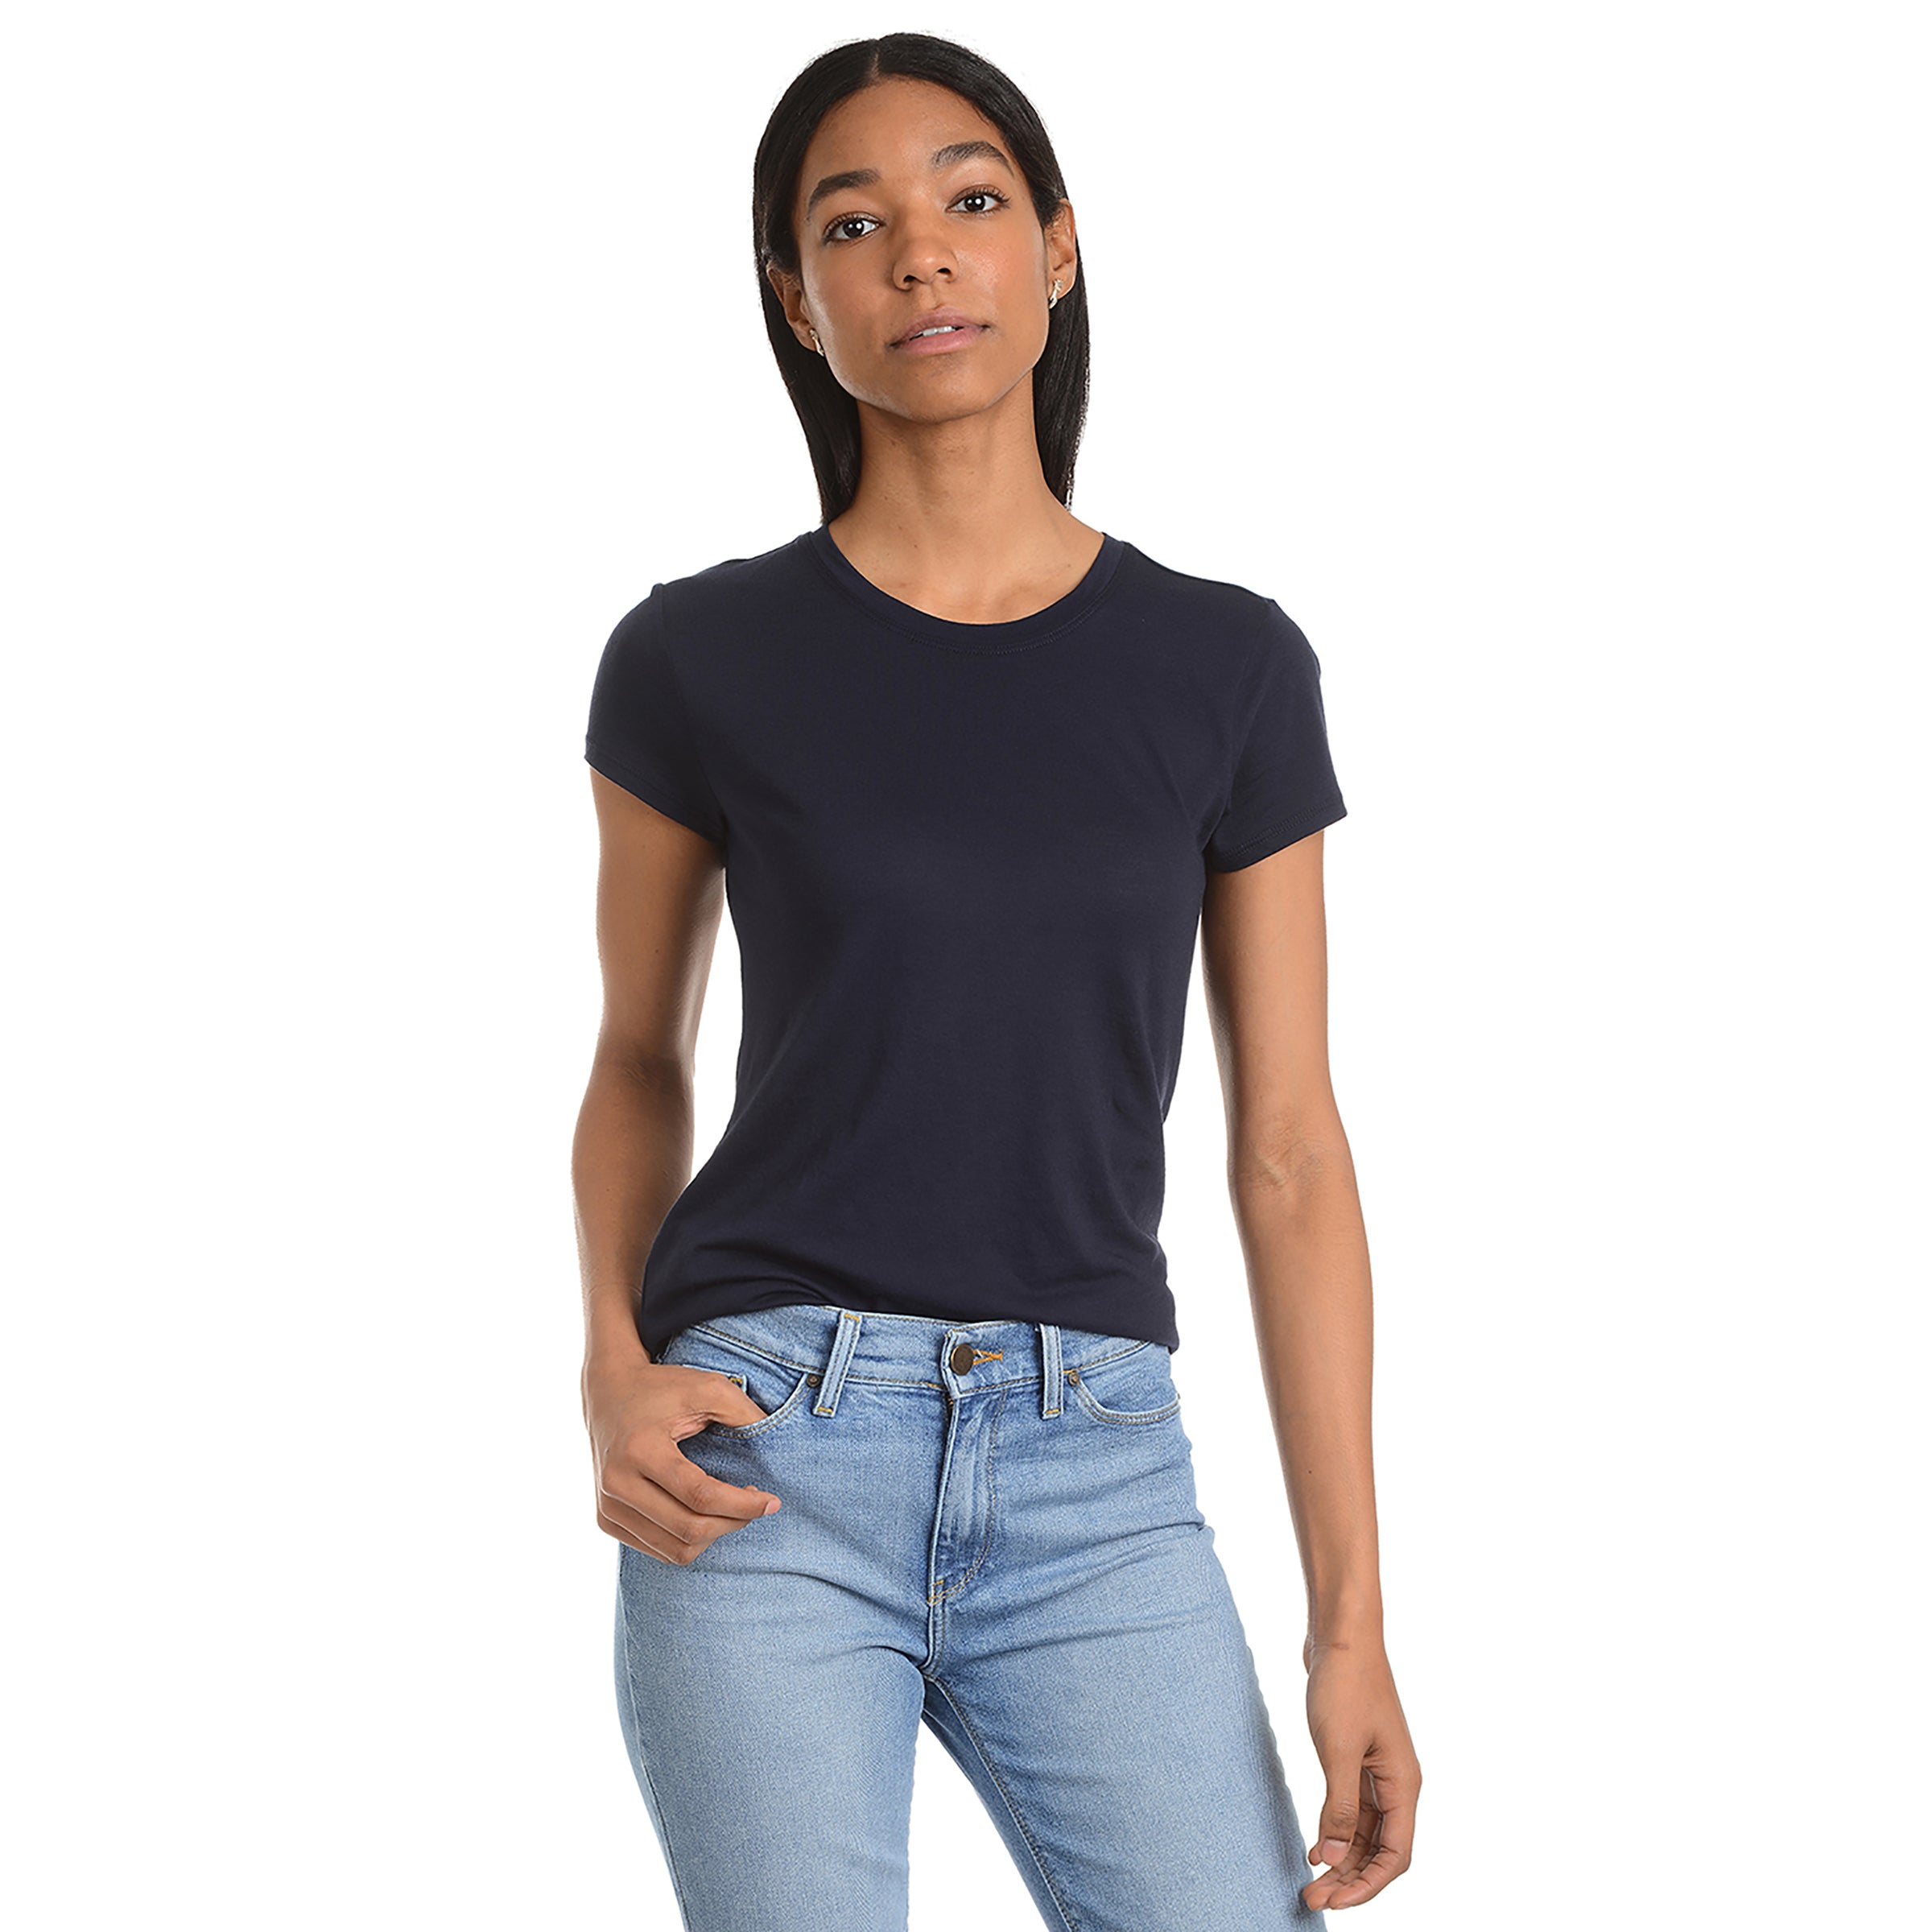 Women wearing Navy Fitted Crew Marcy Tee